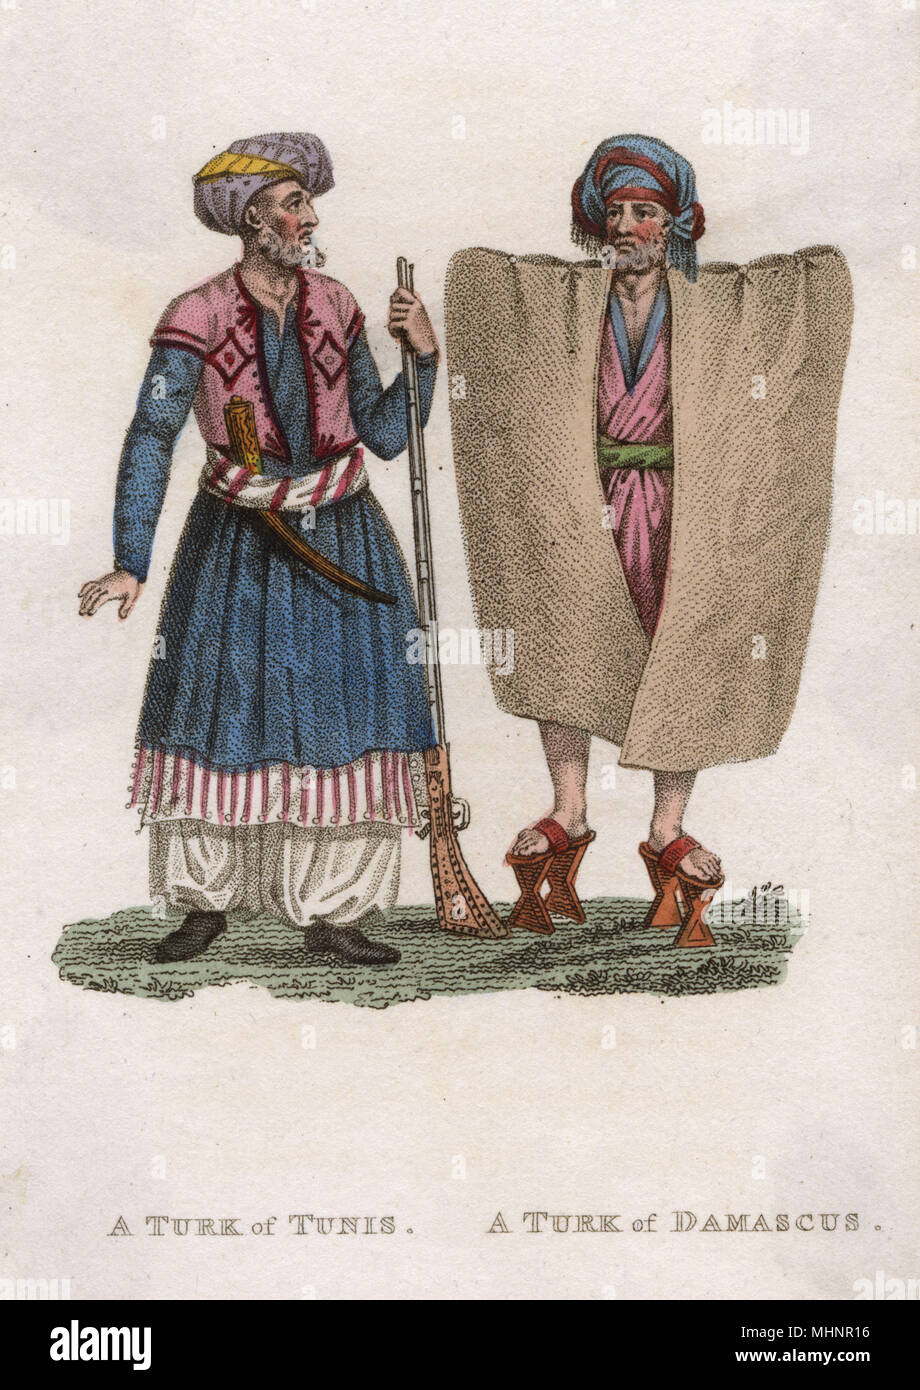 Ottoman Empire - Turk from Tunis and a Turk from Damascus.     Date: 1821 Stock Photo